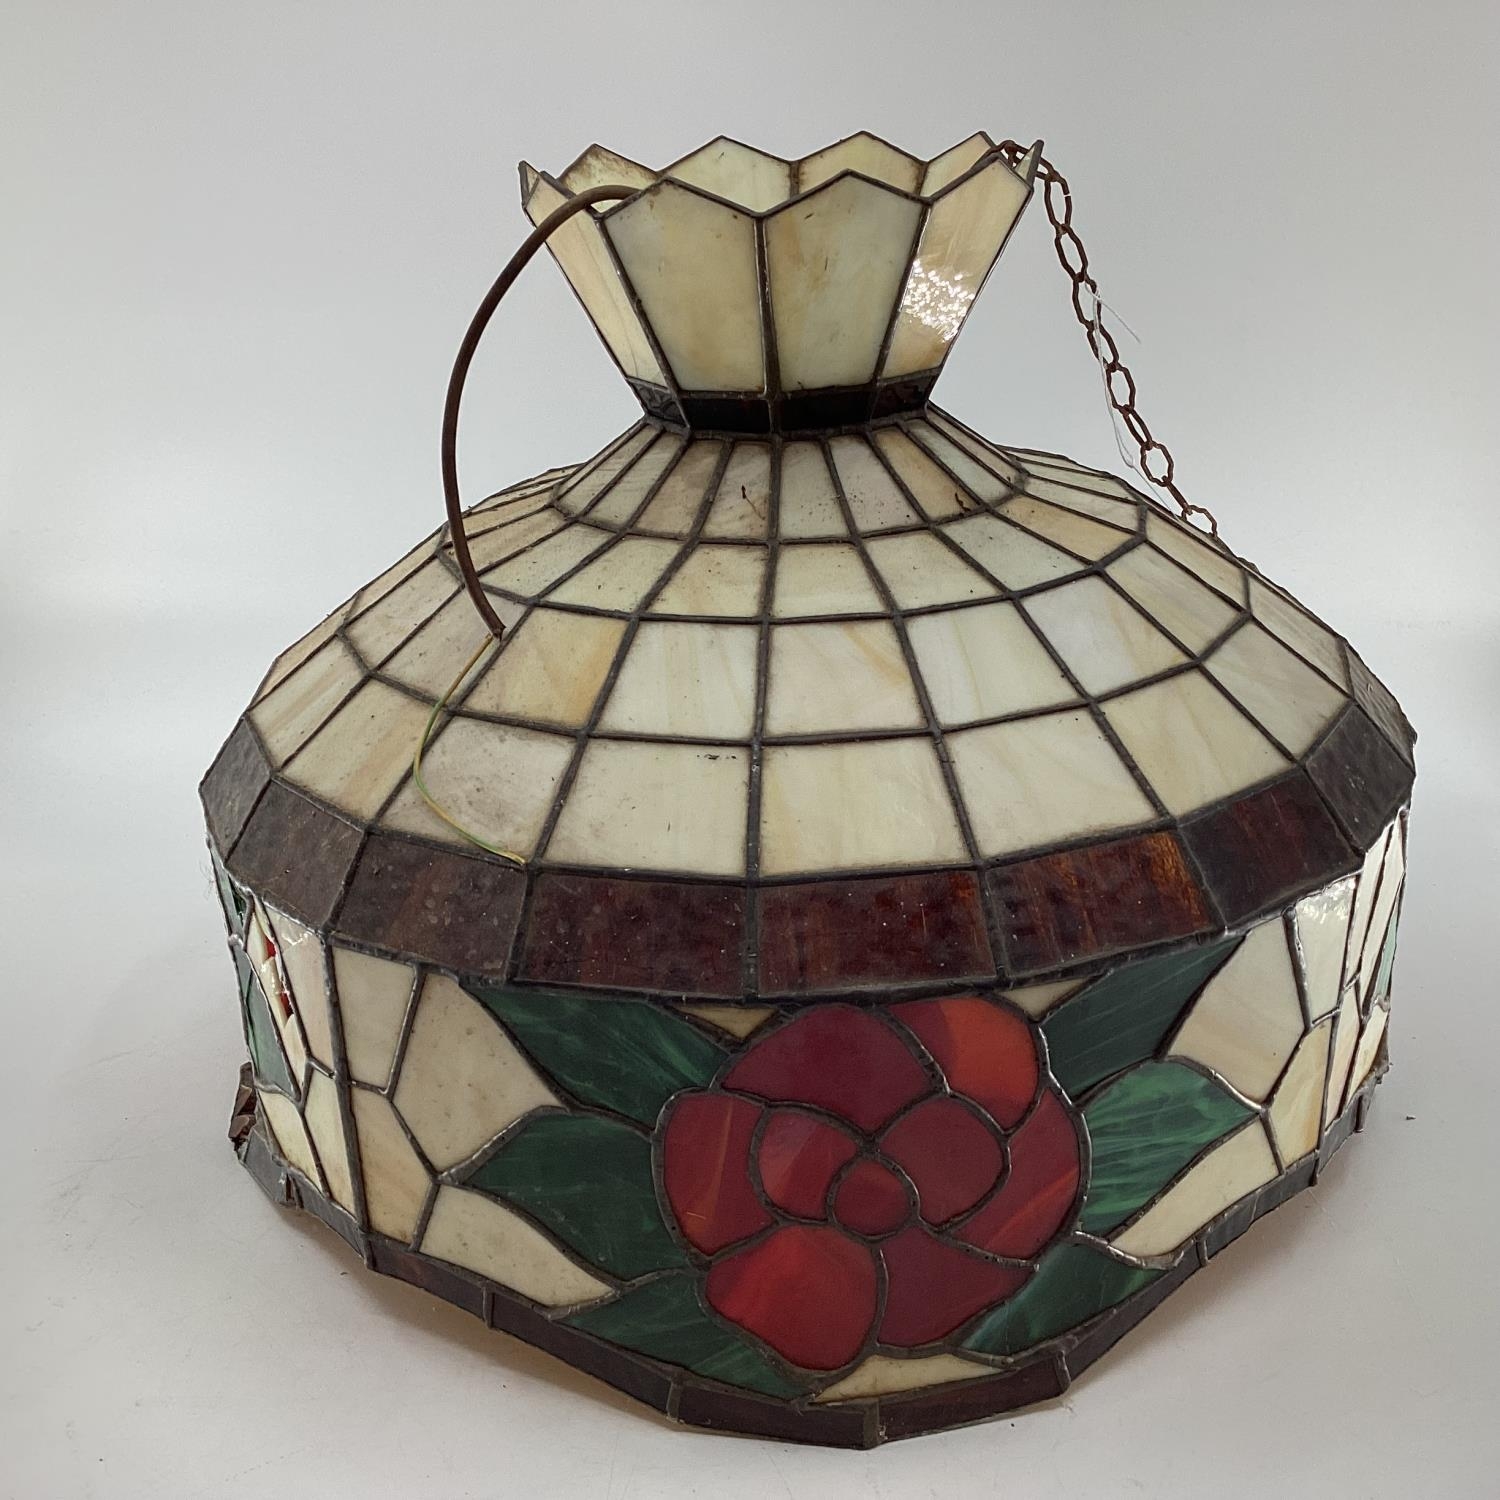 Large Tiffany Style lead glass celling lamp shade, some damage and losses, 53cm d - Image 2 of 8